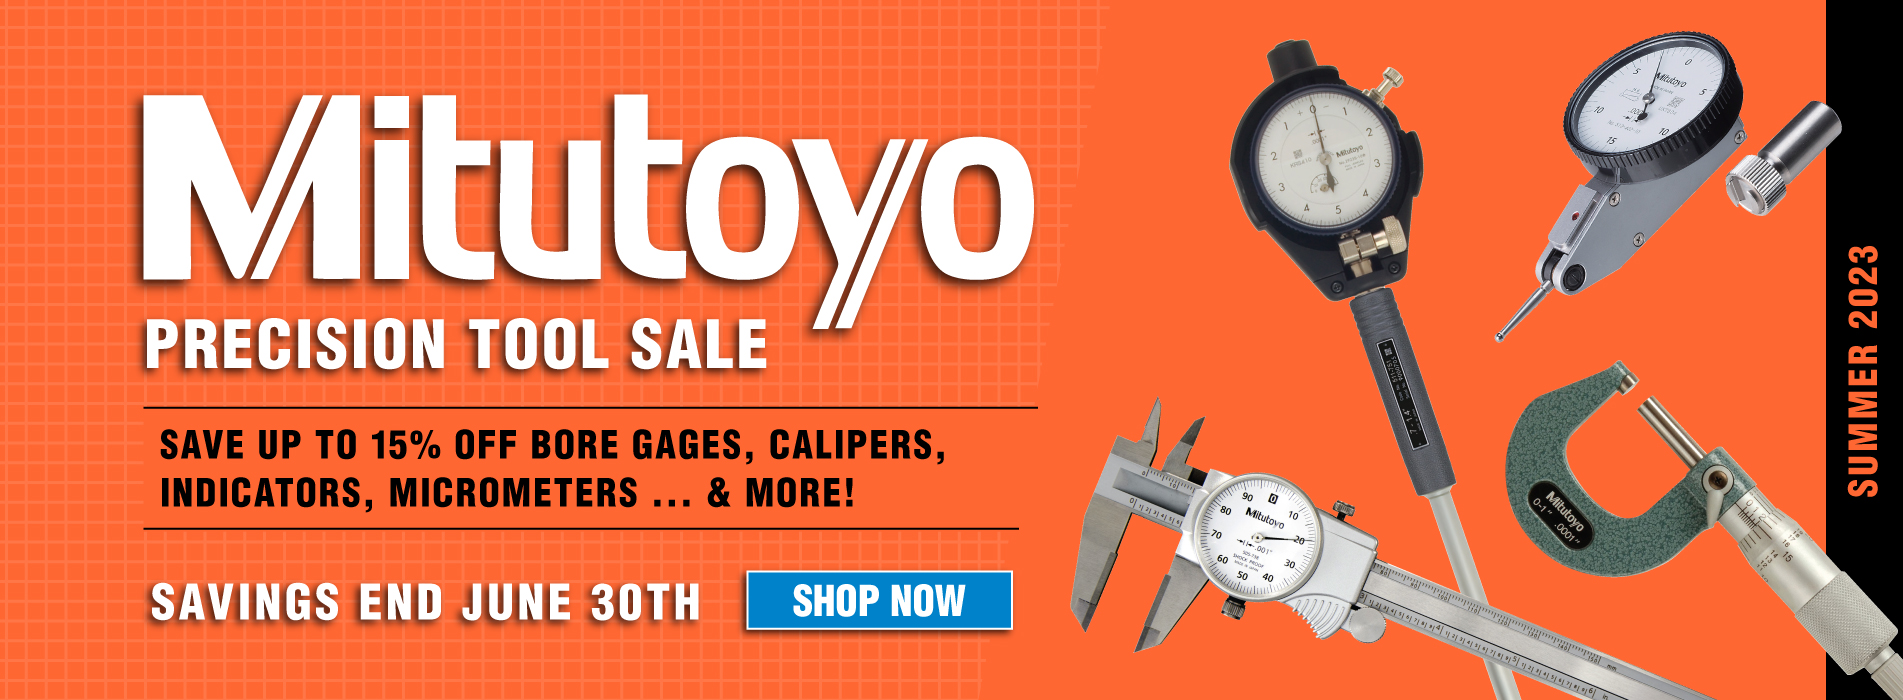 Shop the BRAND NEW Mitutoyo Spring Sale!